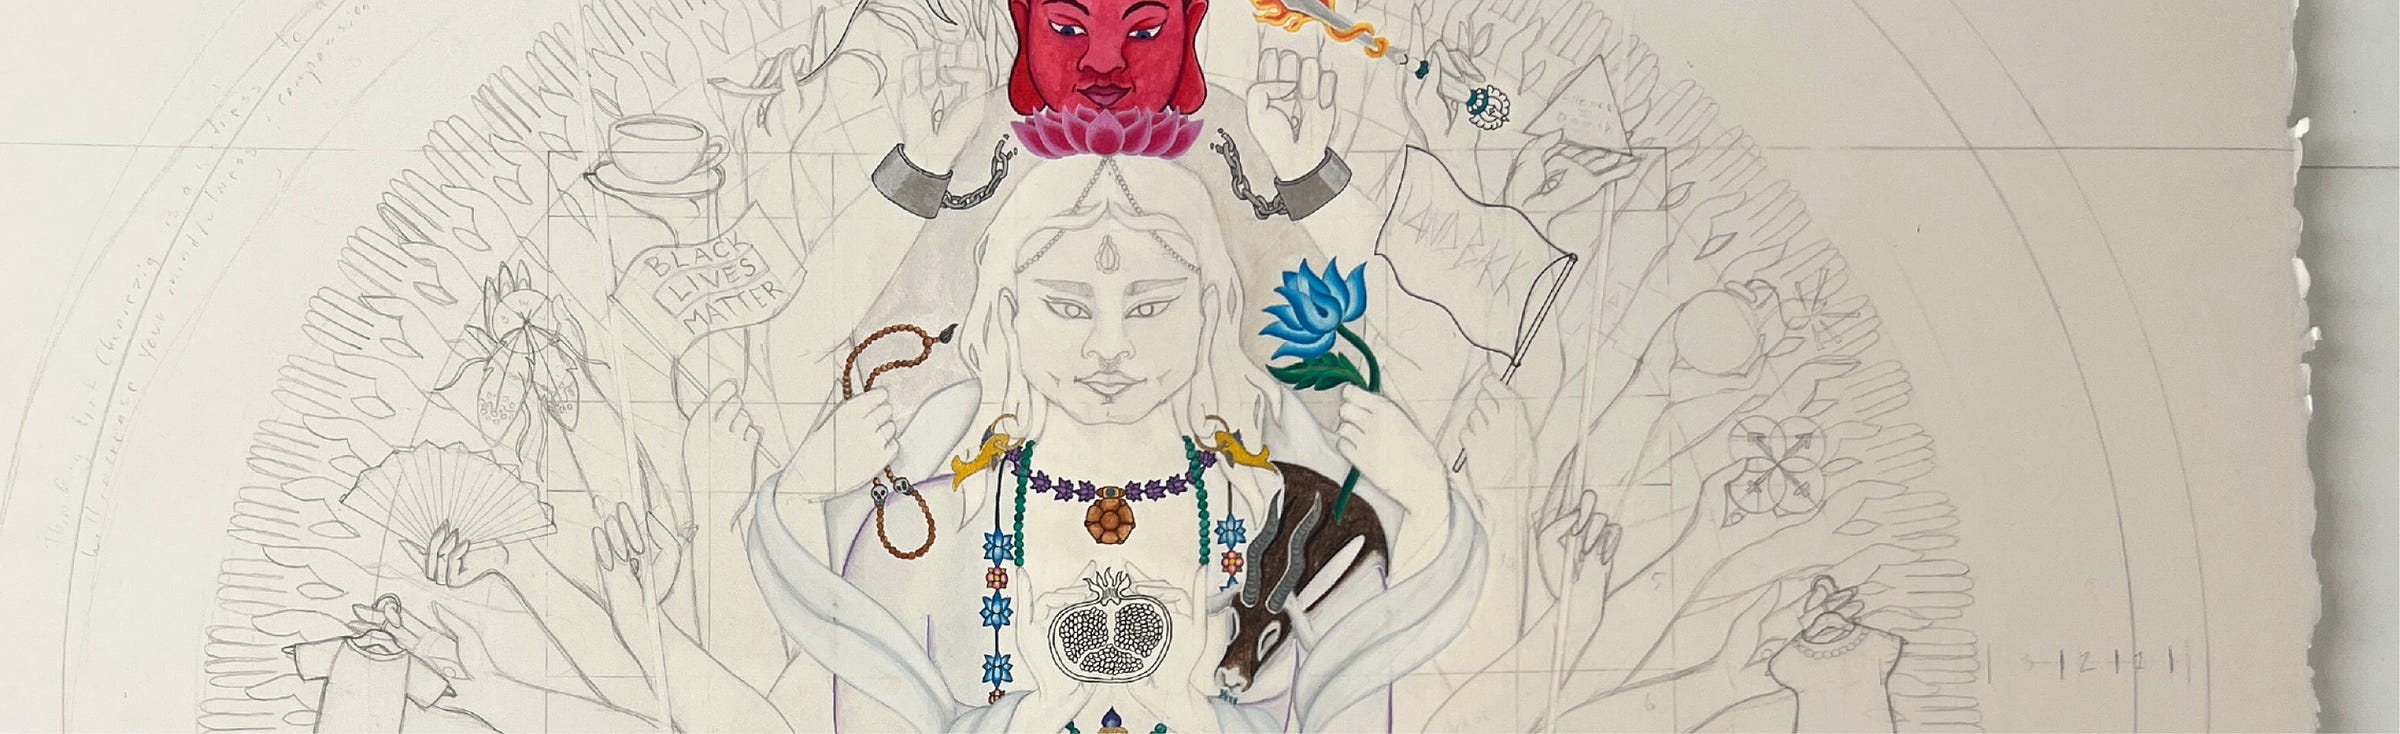 Glimpse of the progress of the figure of Avalokiteshvara. The figure is still largely pencil outline in this image, although there are vibrants notes of colour in the adornments and sacred objects they are wearing and holding. 